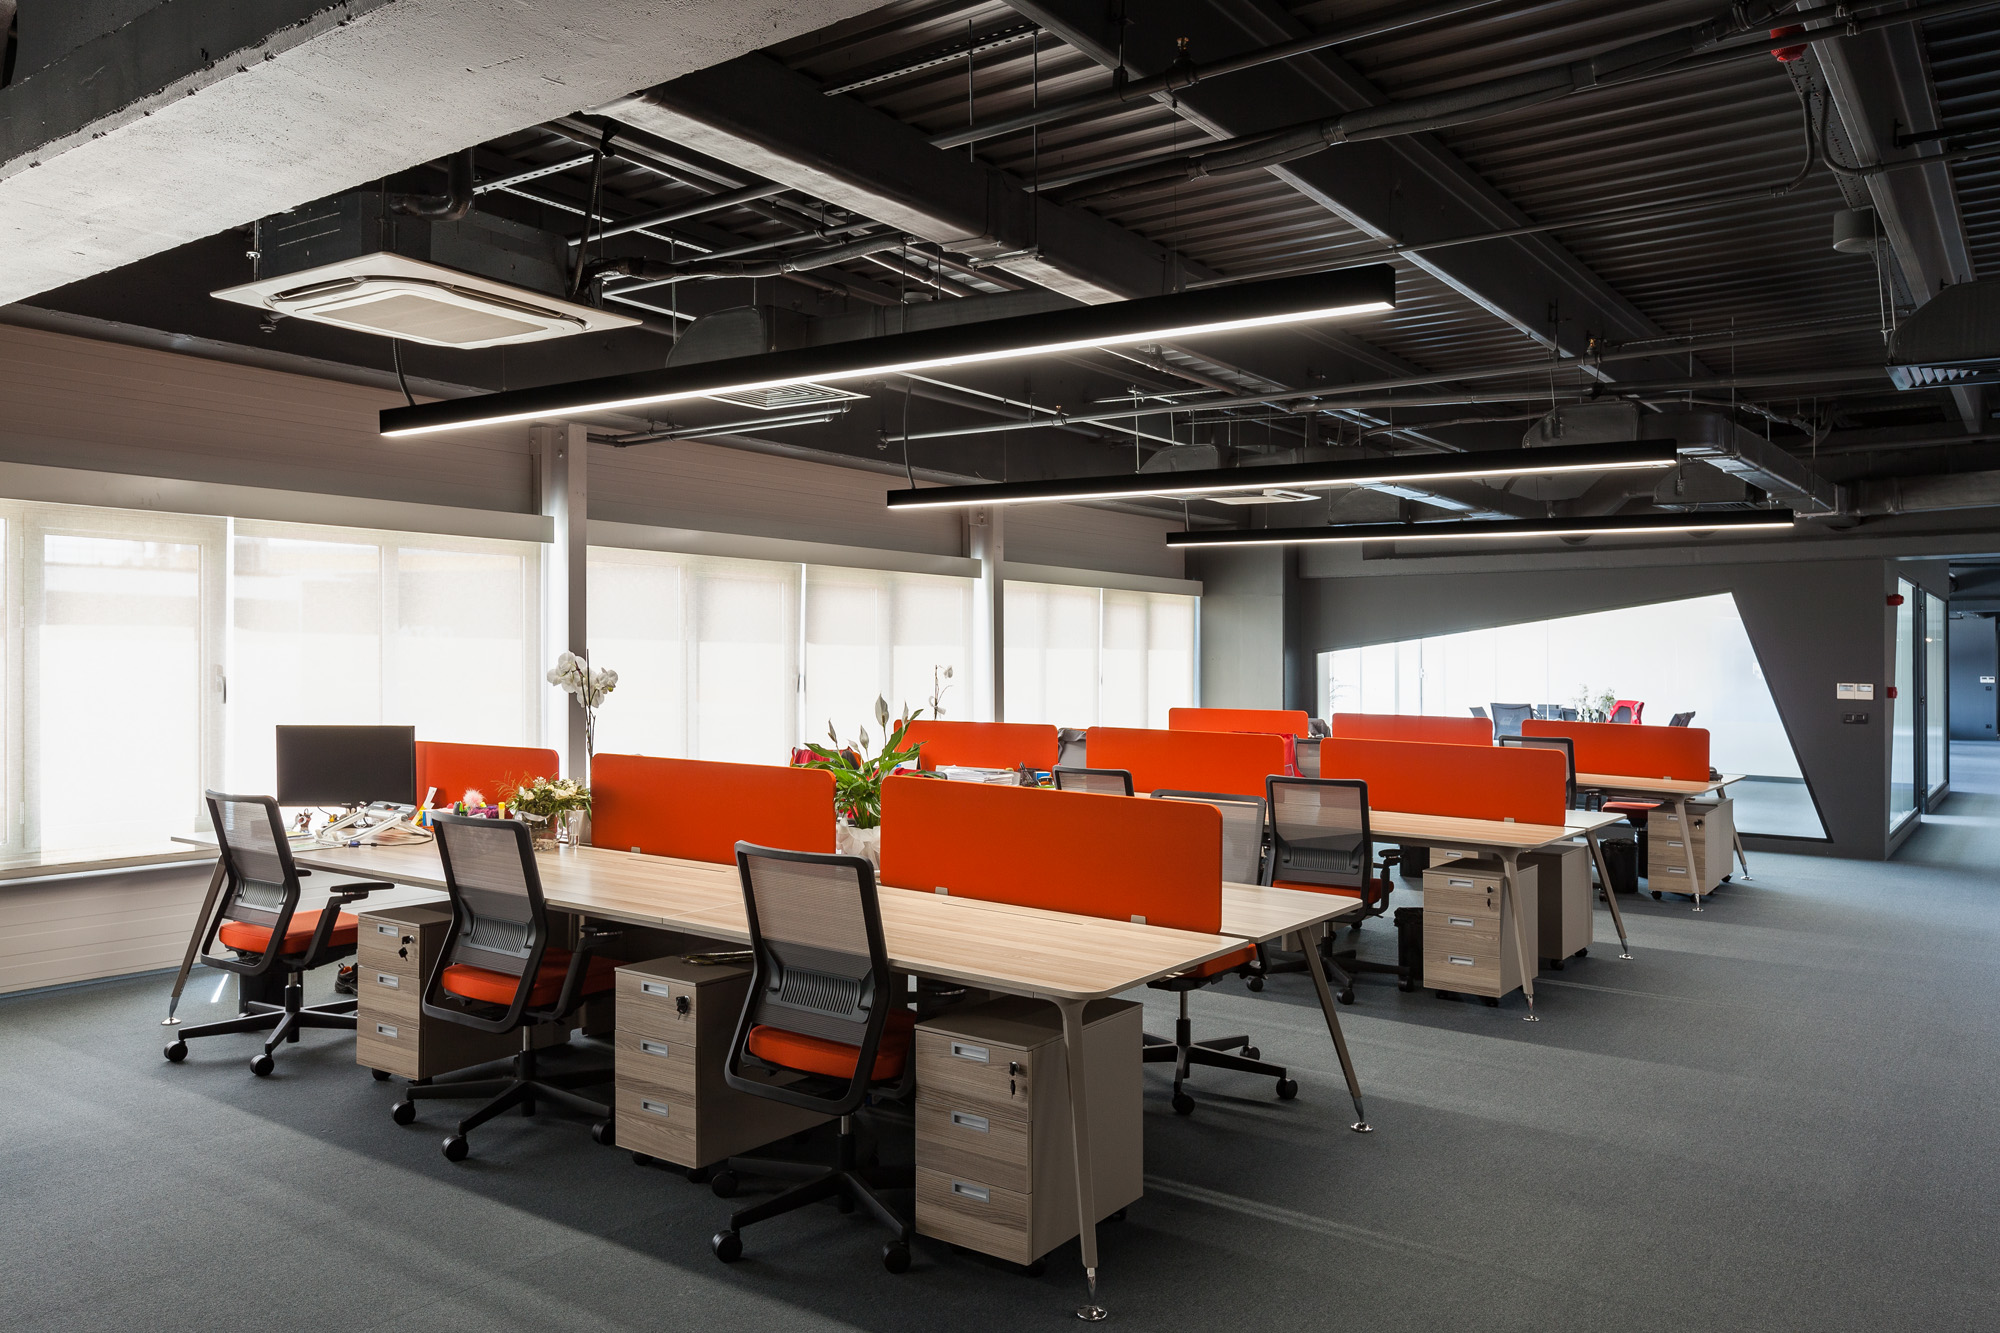 Tips to Consider About Office Lighting